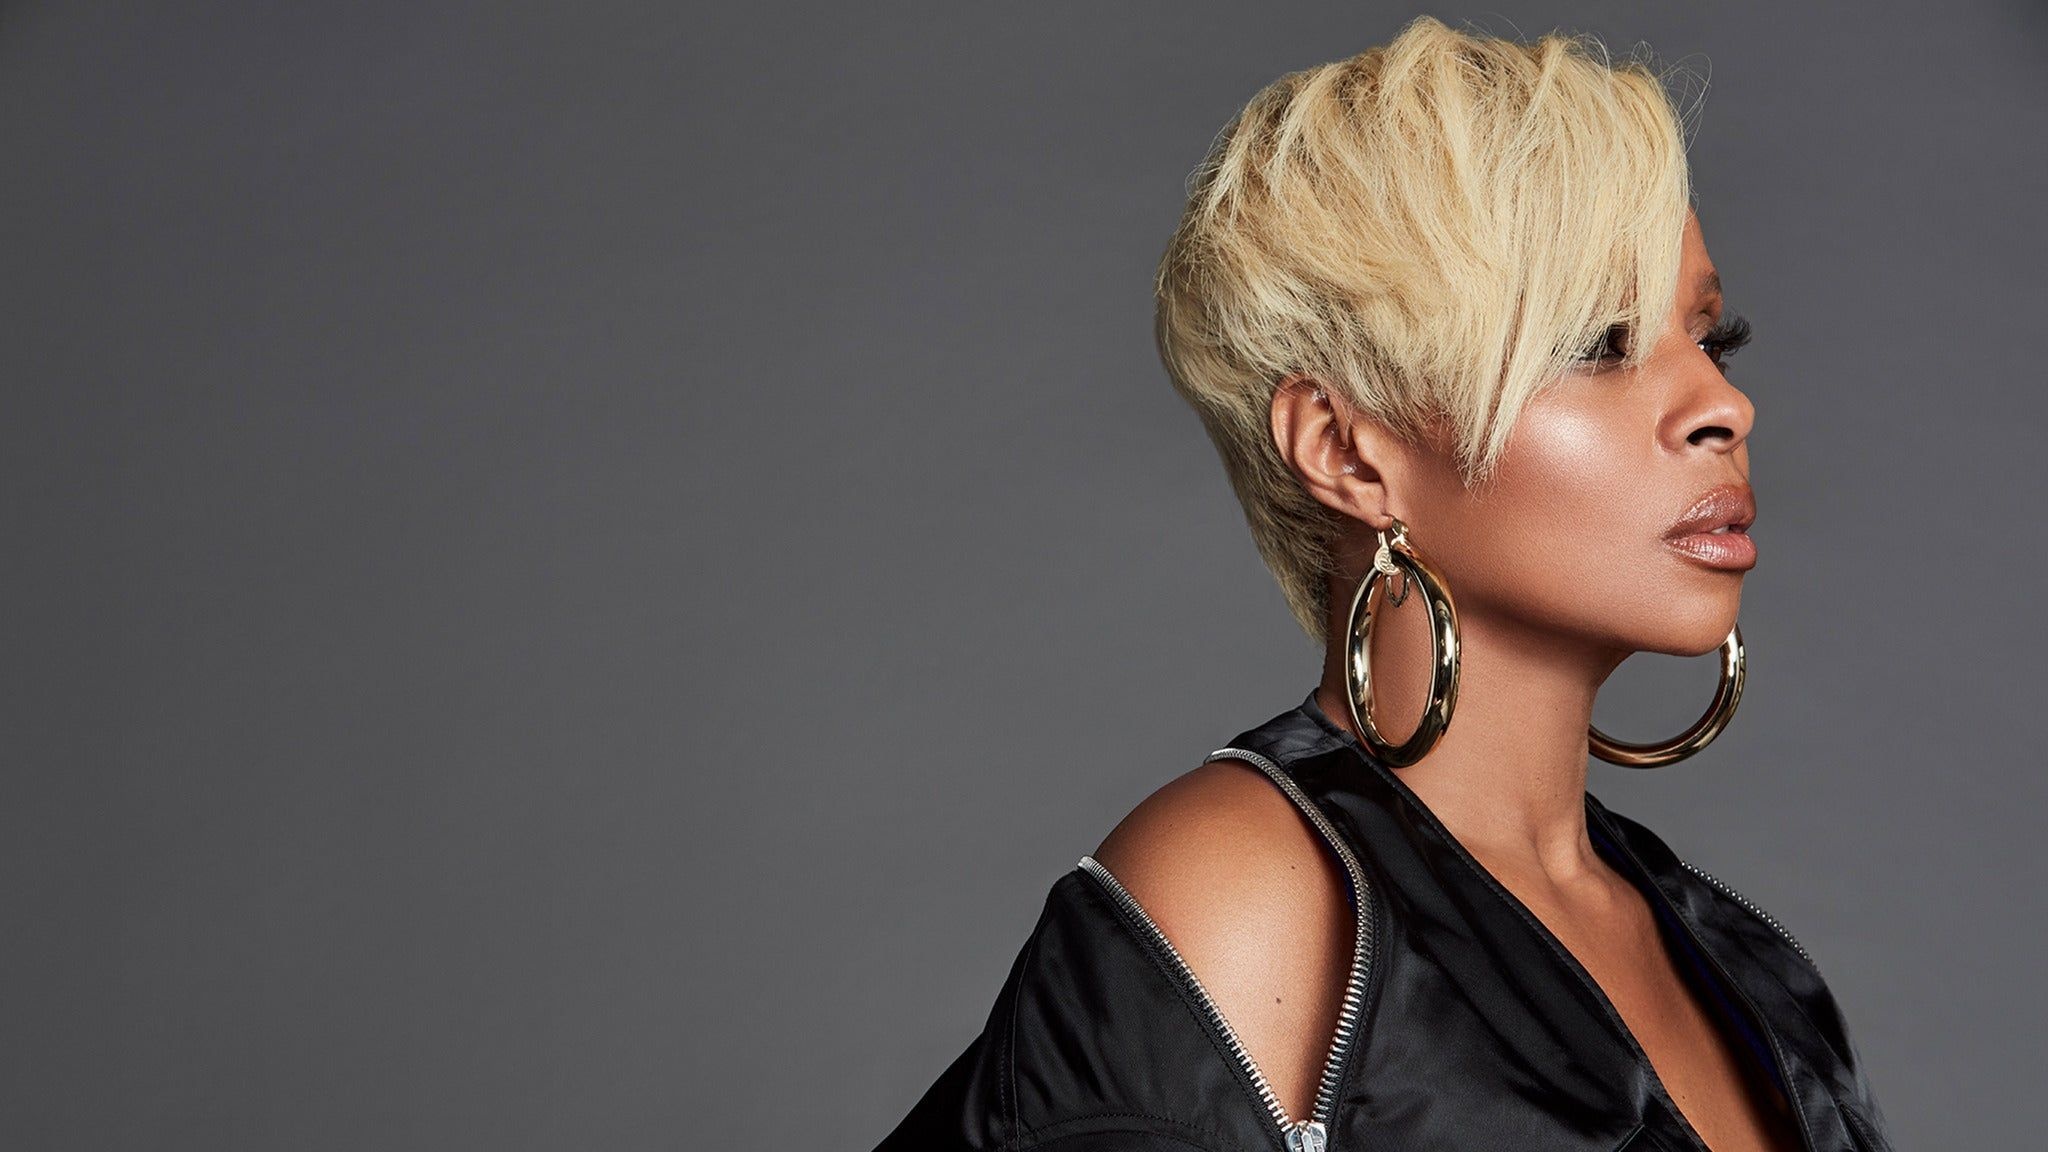 Mary J. Blige: An American RnB, Soul, and Hip Hop singer, songwriter, rapper, and actress. 2050x1160 HD Wallpaper.